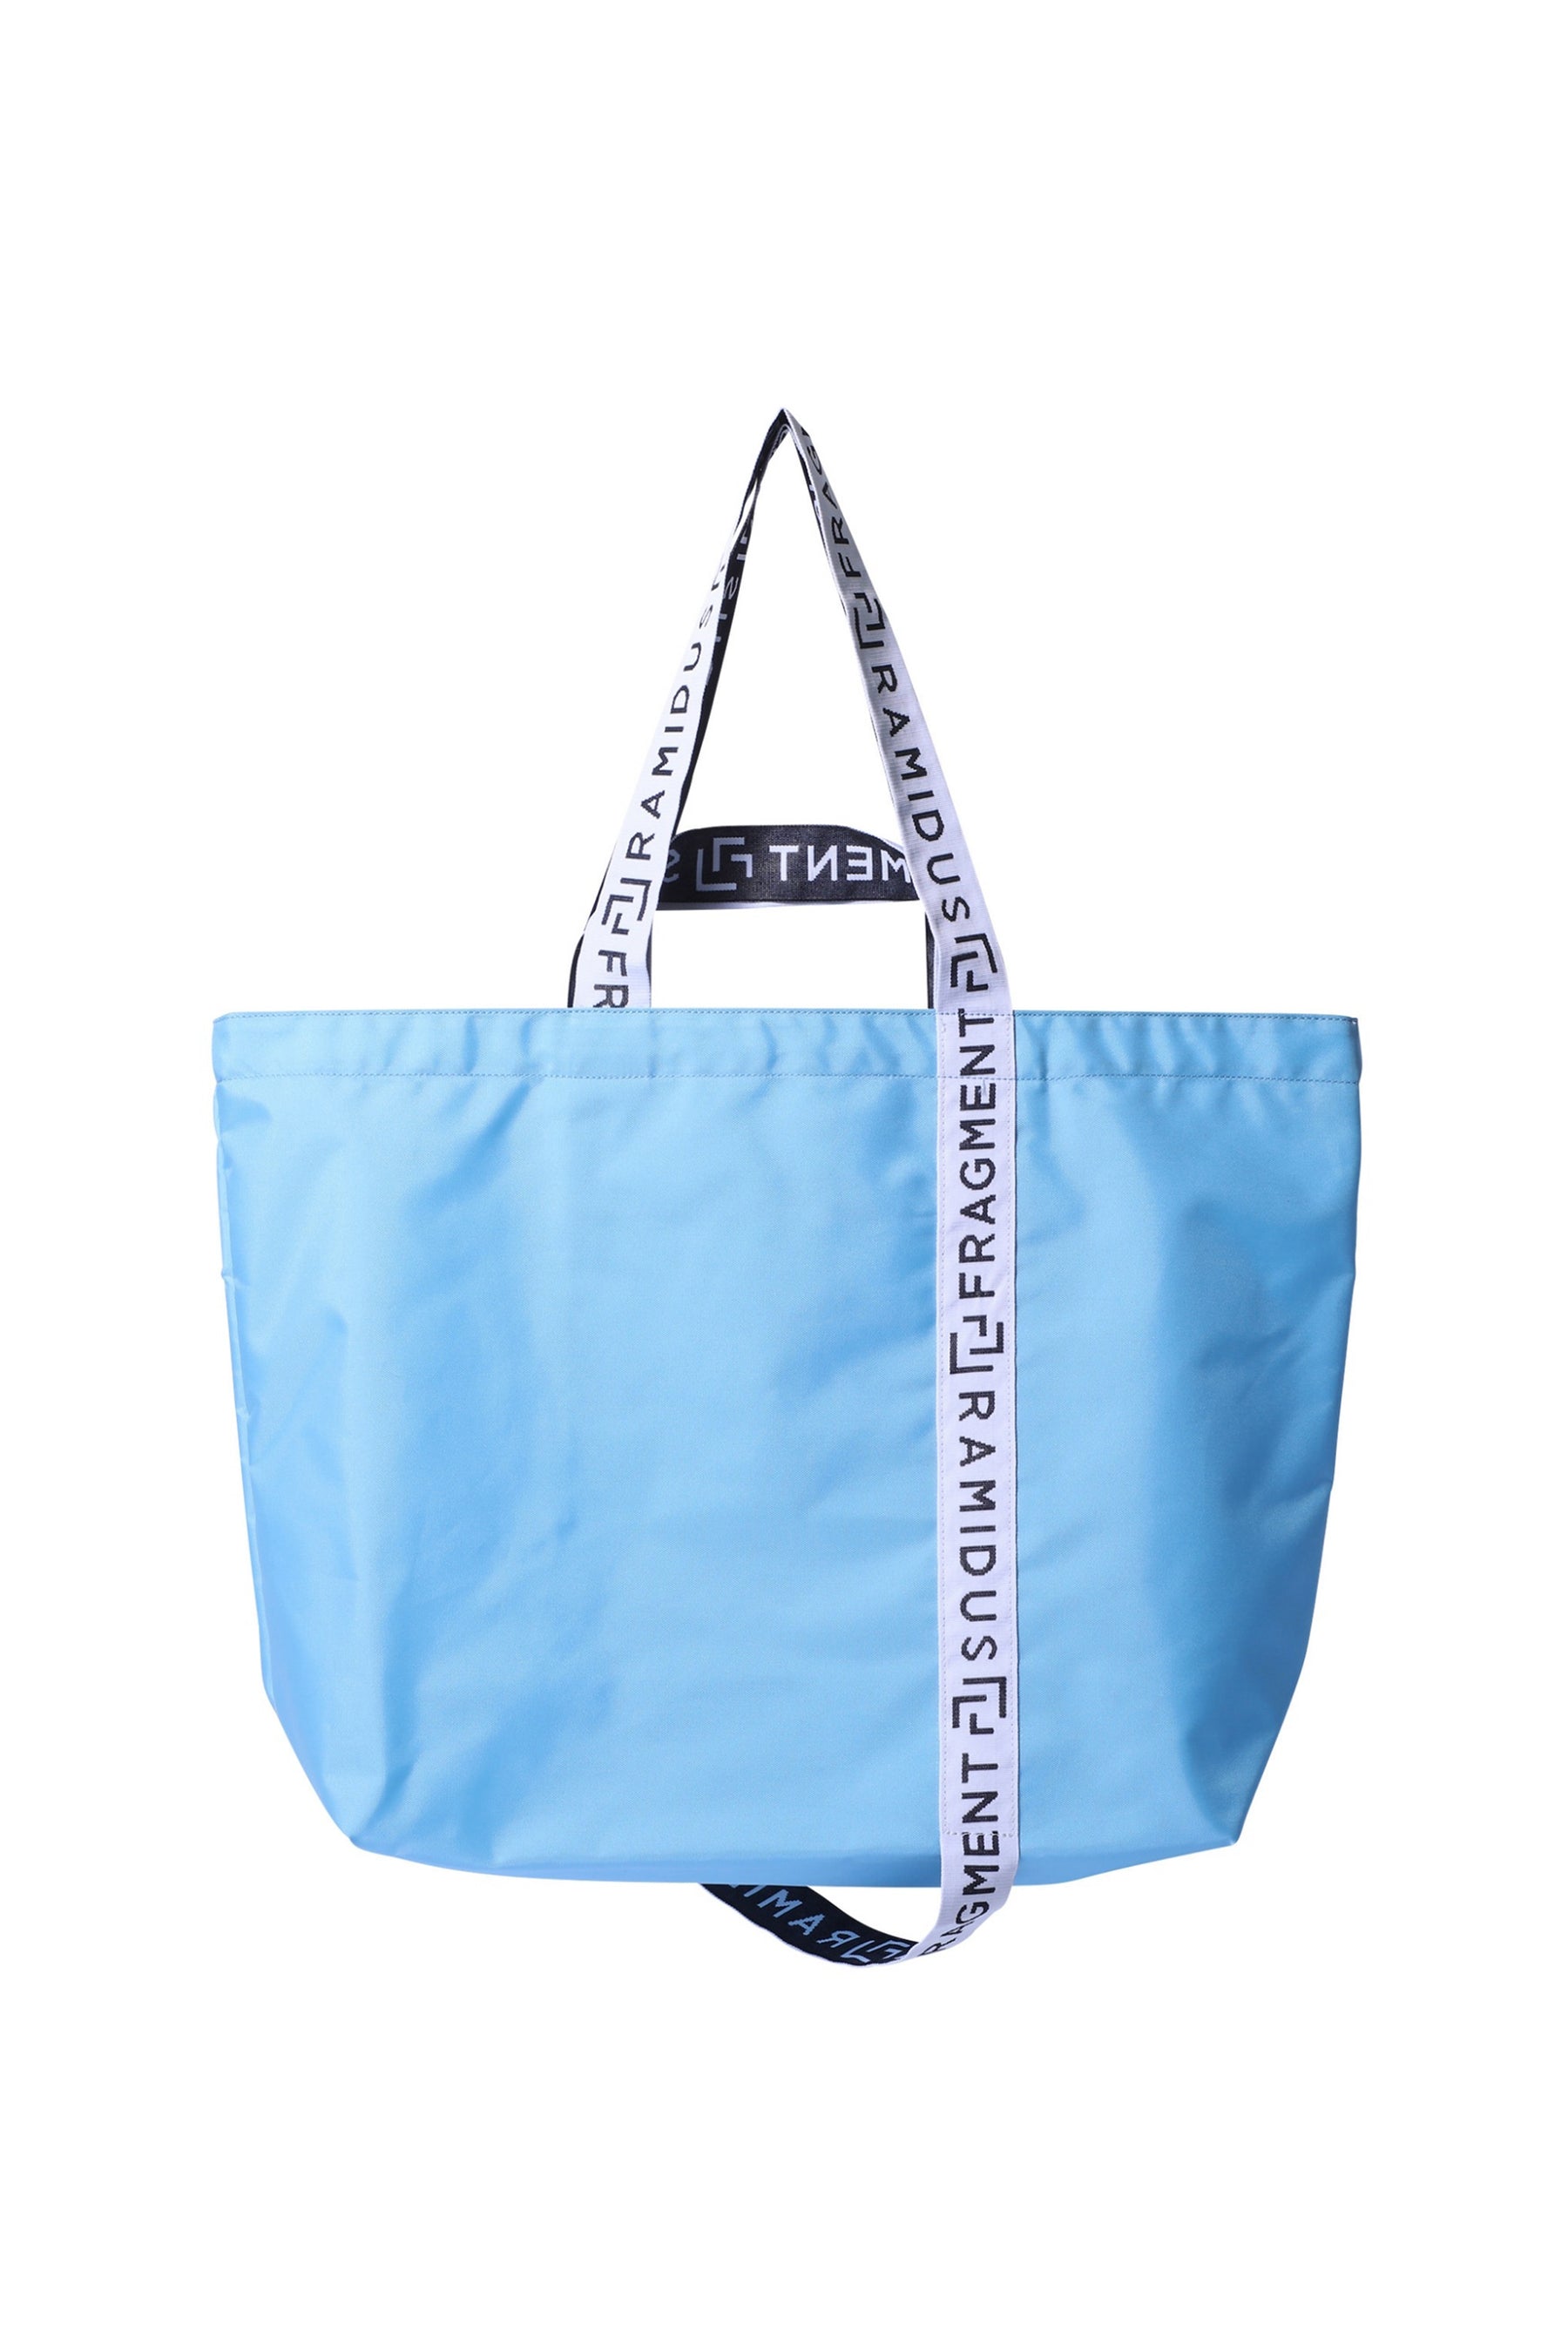 Height23cmGANNI Small Canvas Tote Bag バッグ 新品 スマイル